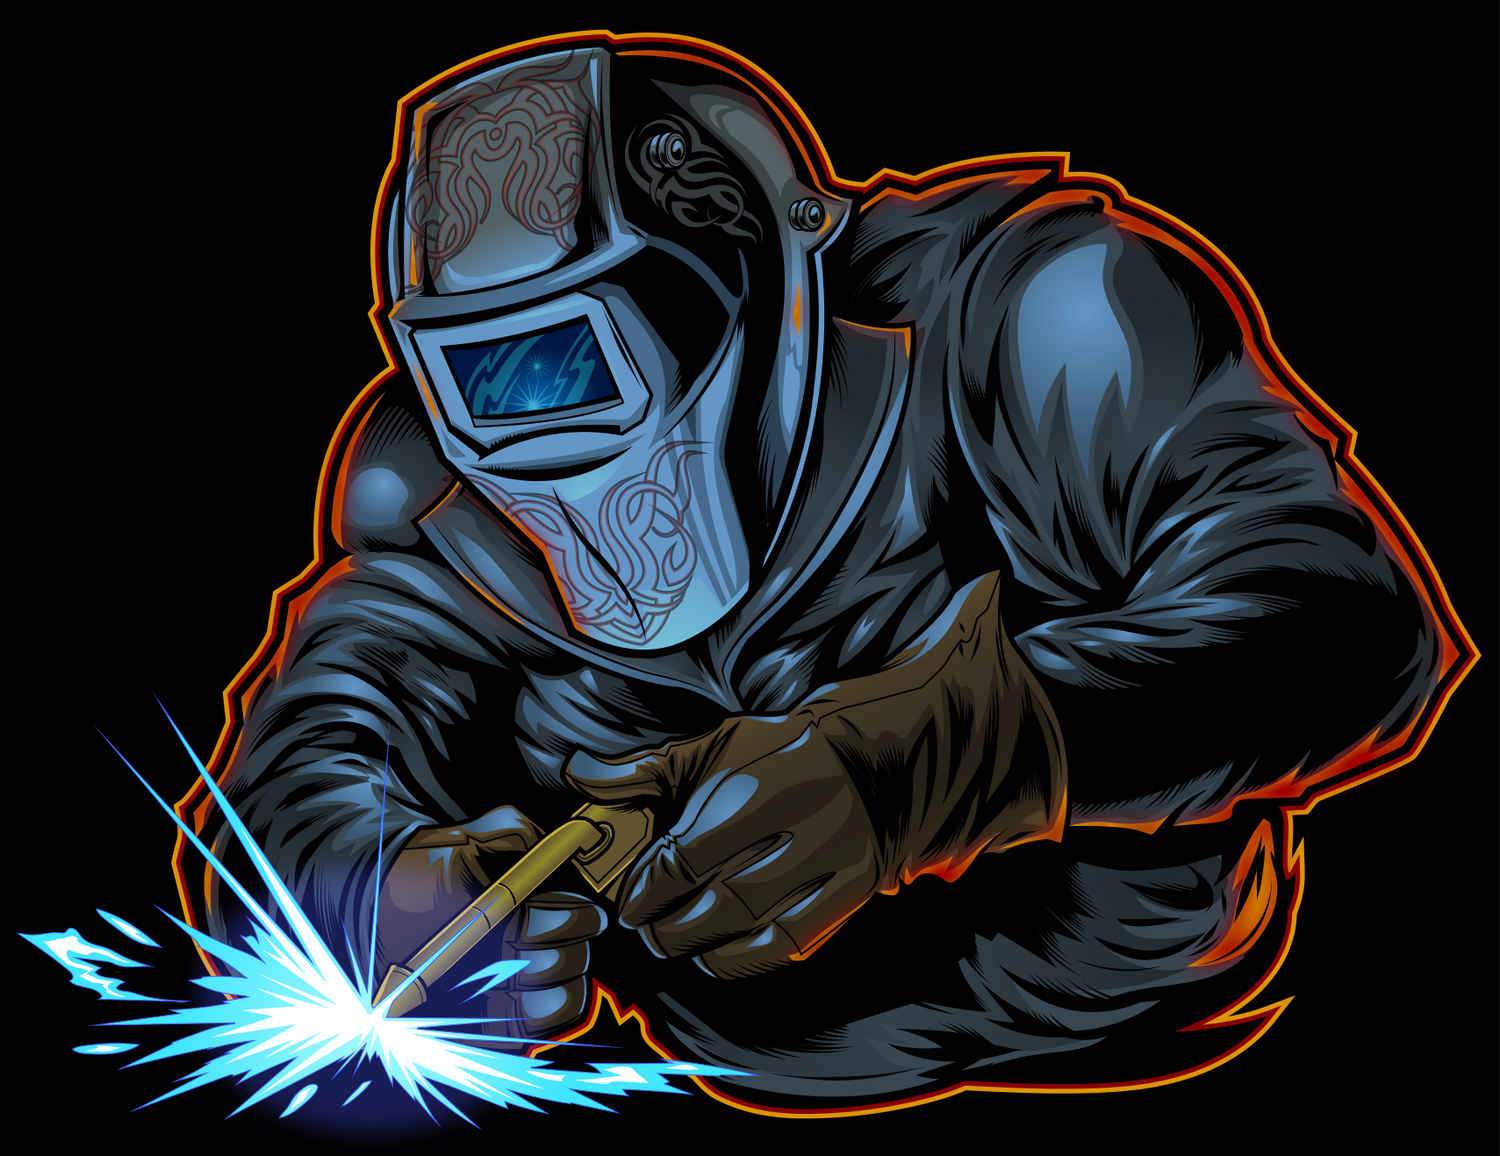 Cartoon drawing of a welder with blue light shining from the welding torch